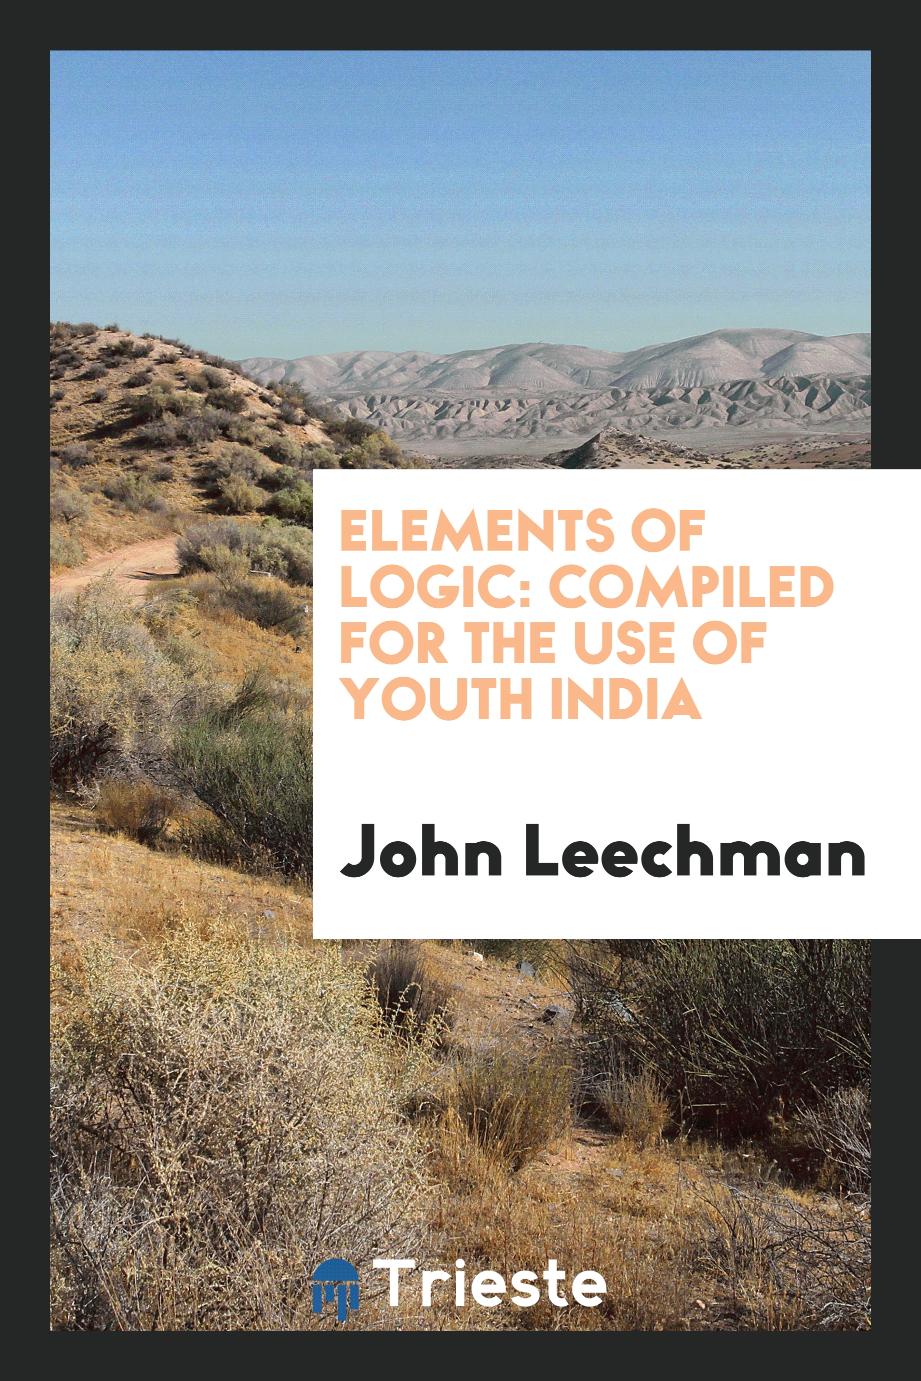 Elements of Logic: Compiled for the Use of Youth India